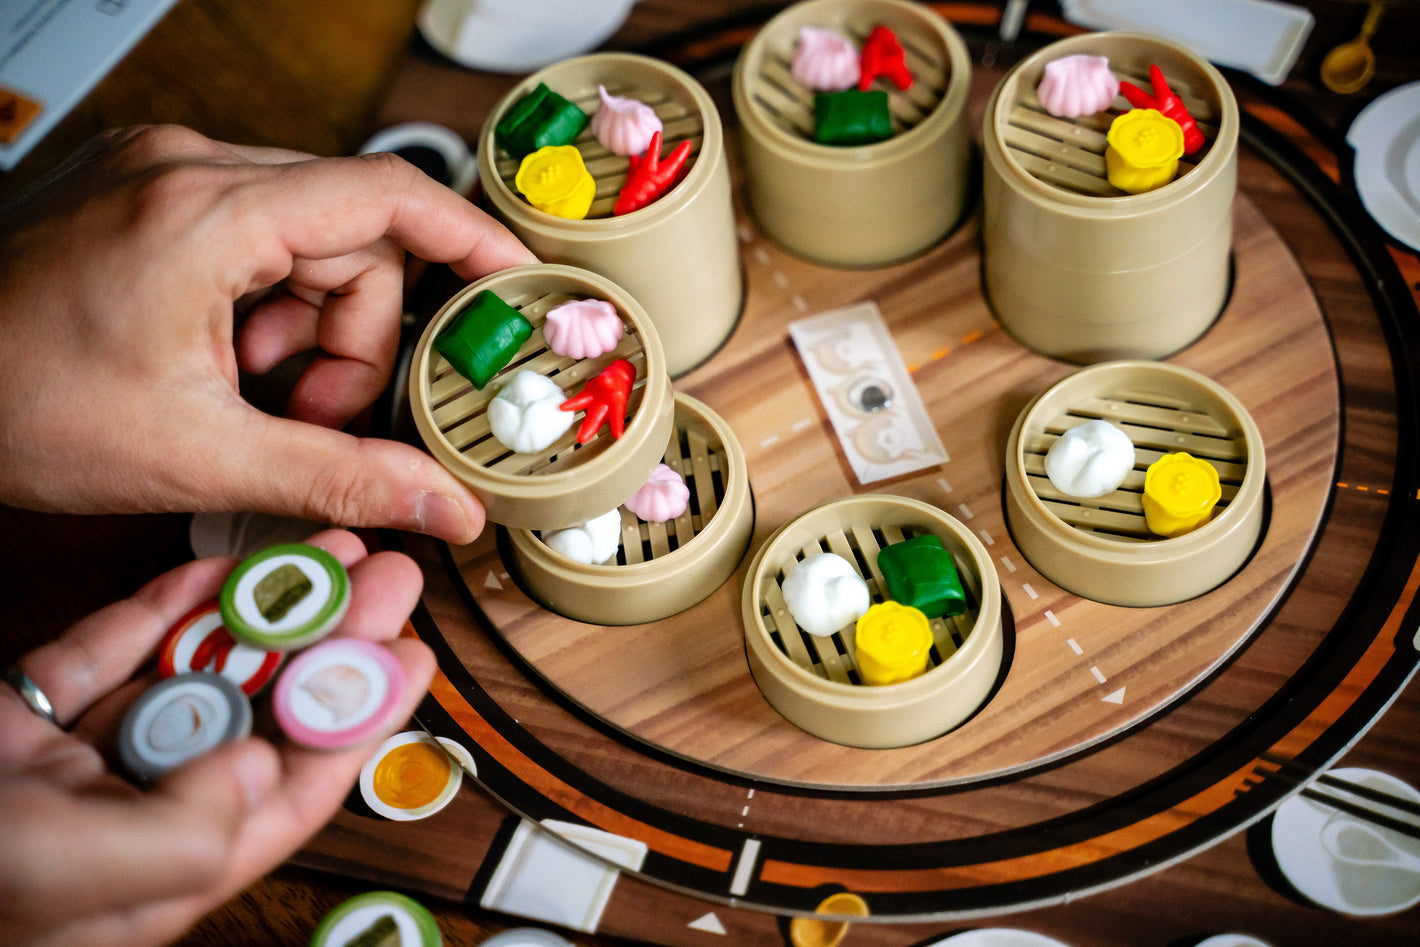 Purchase steamers with Dim Sum using food tokens